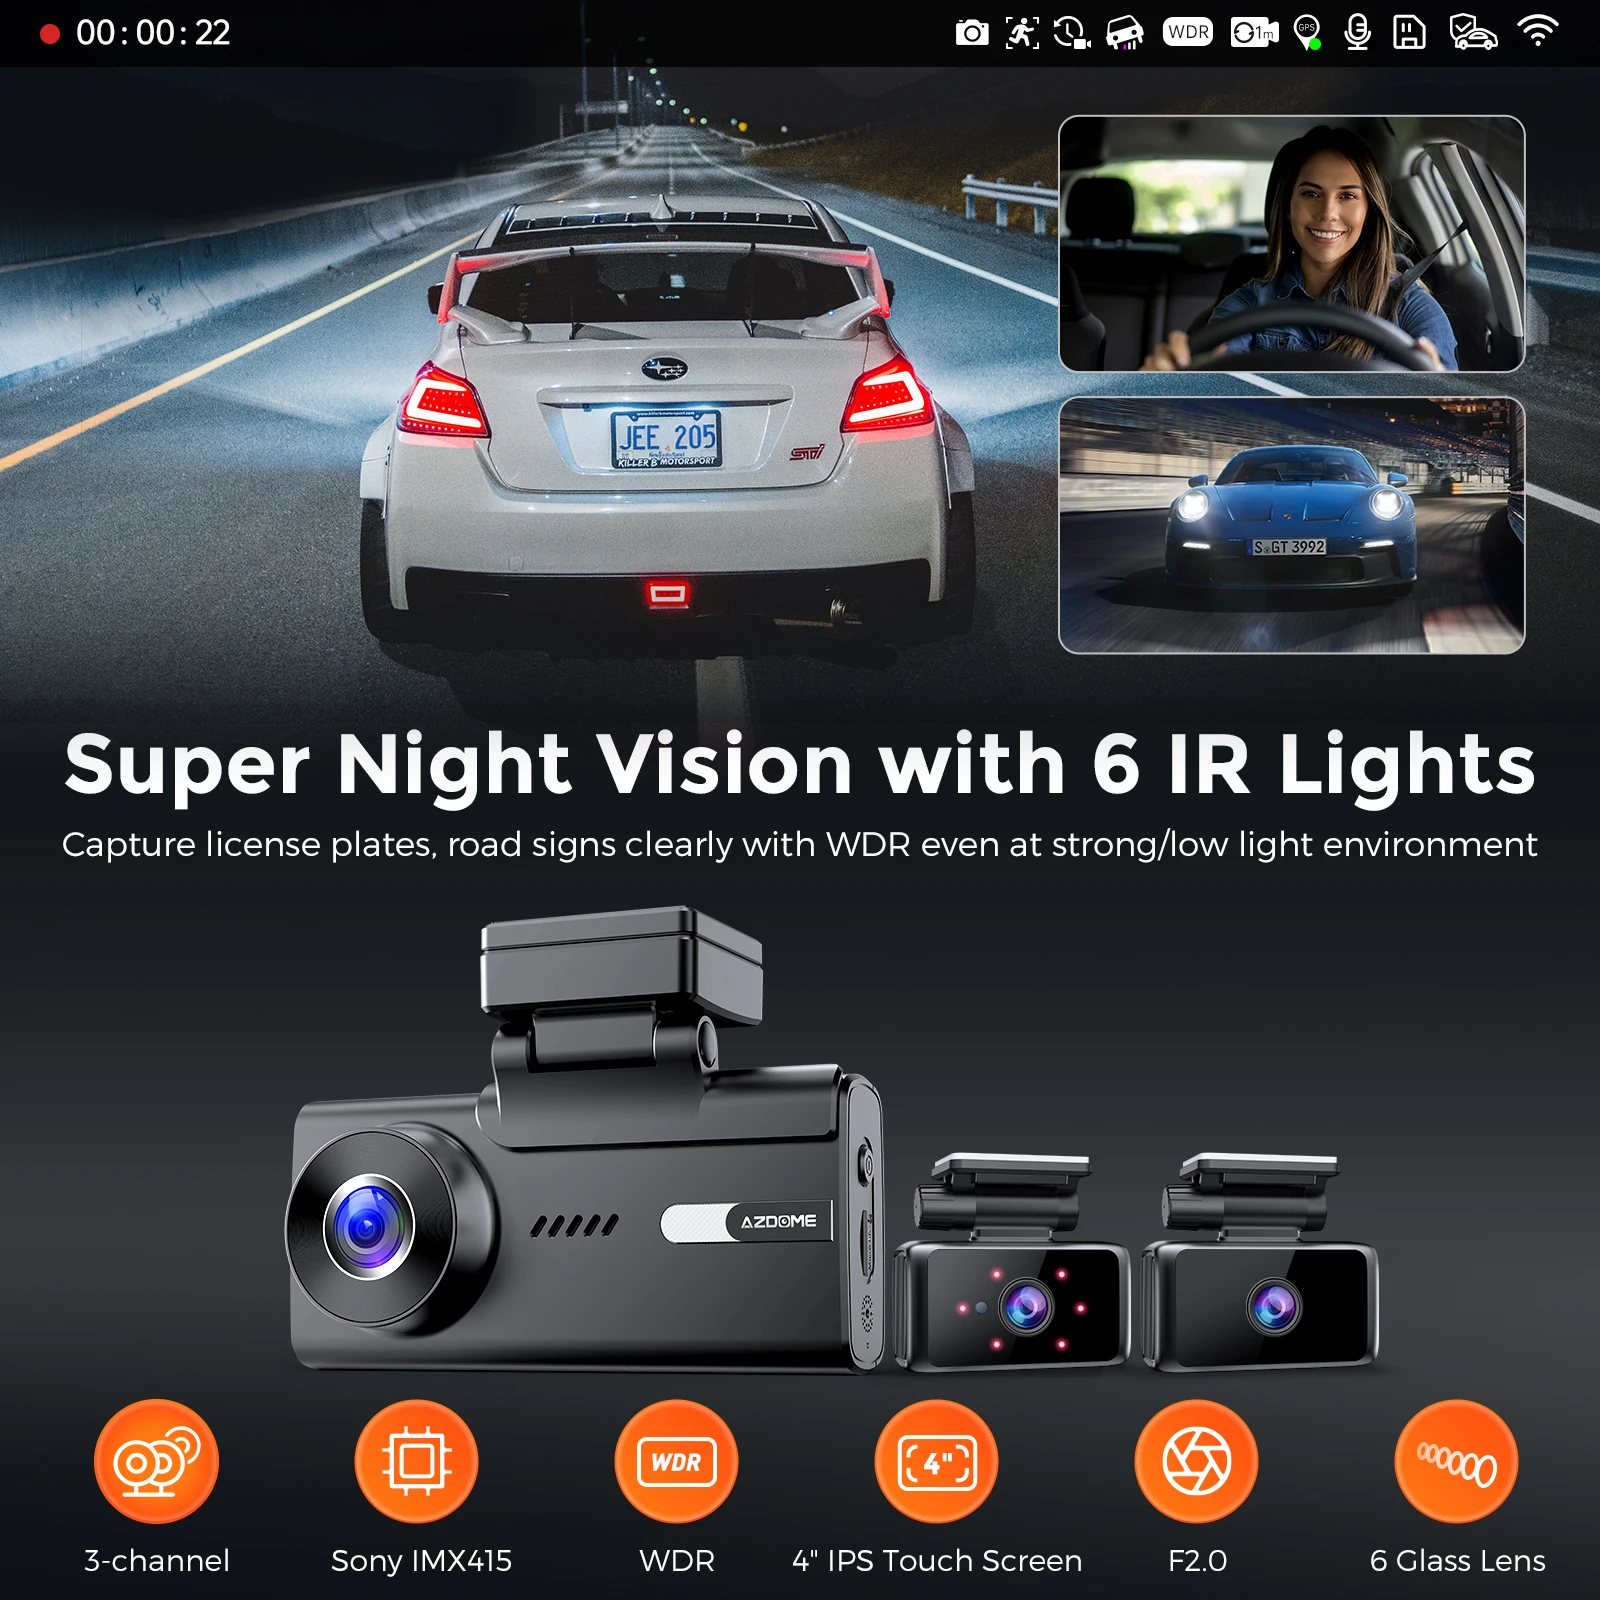 https://ae01.alicdn.com/kf/S76eabd4c1368404da272ca3d5e50da70Z/AZDOME-Dash-Cam-5k-Front-Rear-M580-5GHz-WiFi-Built-in-GPS-4-Touch-Screen-24H.jpg